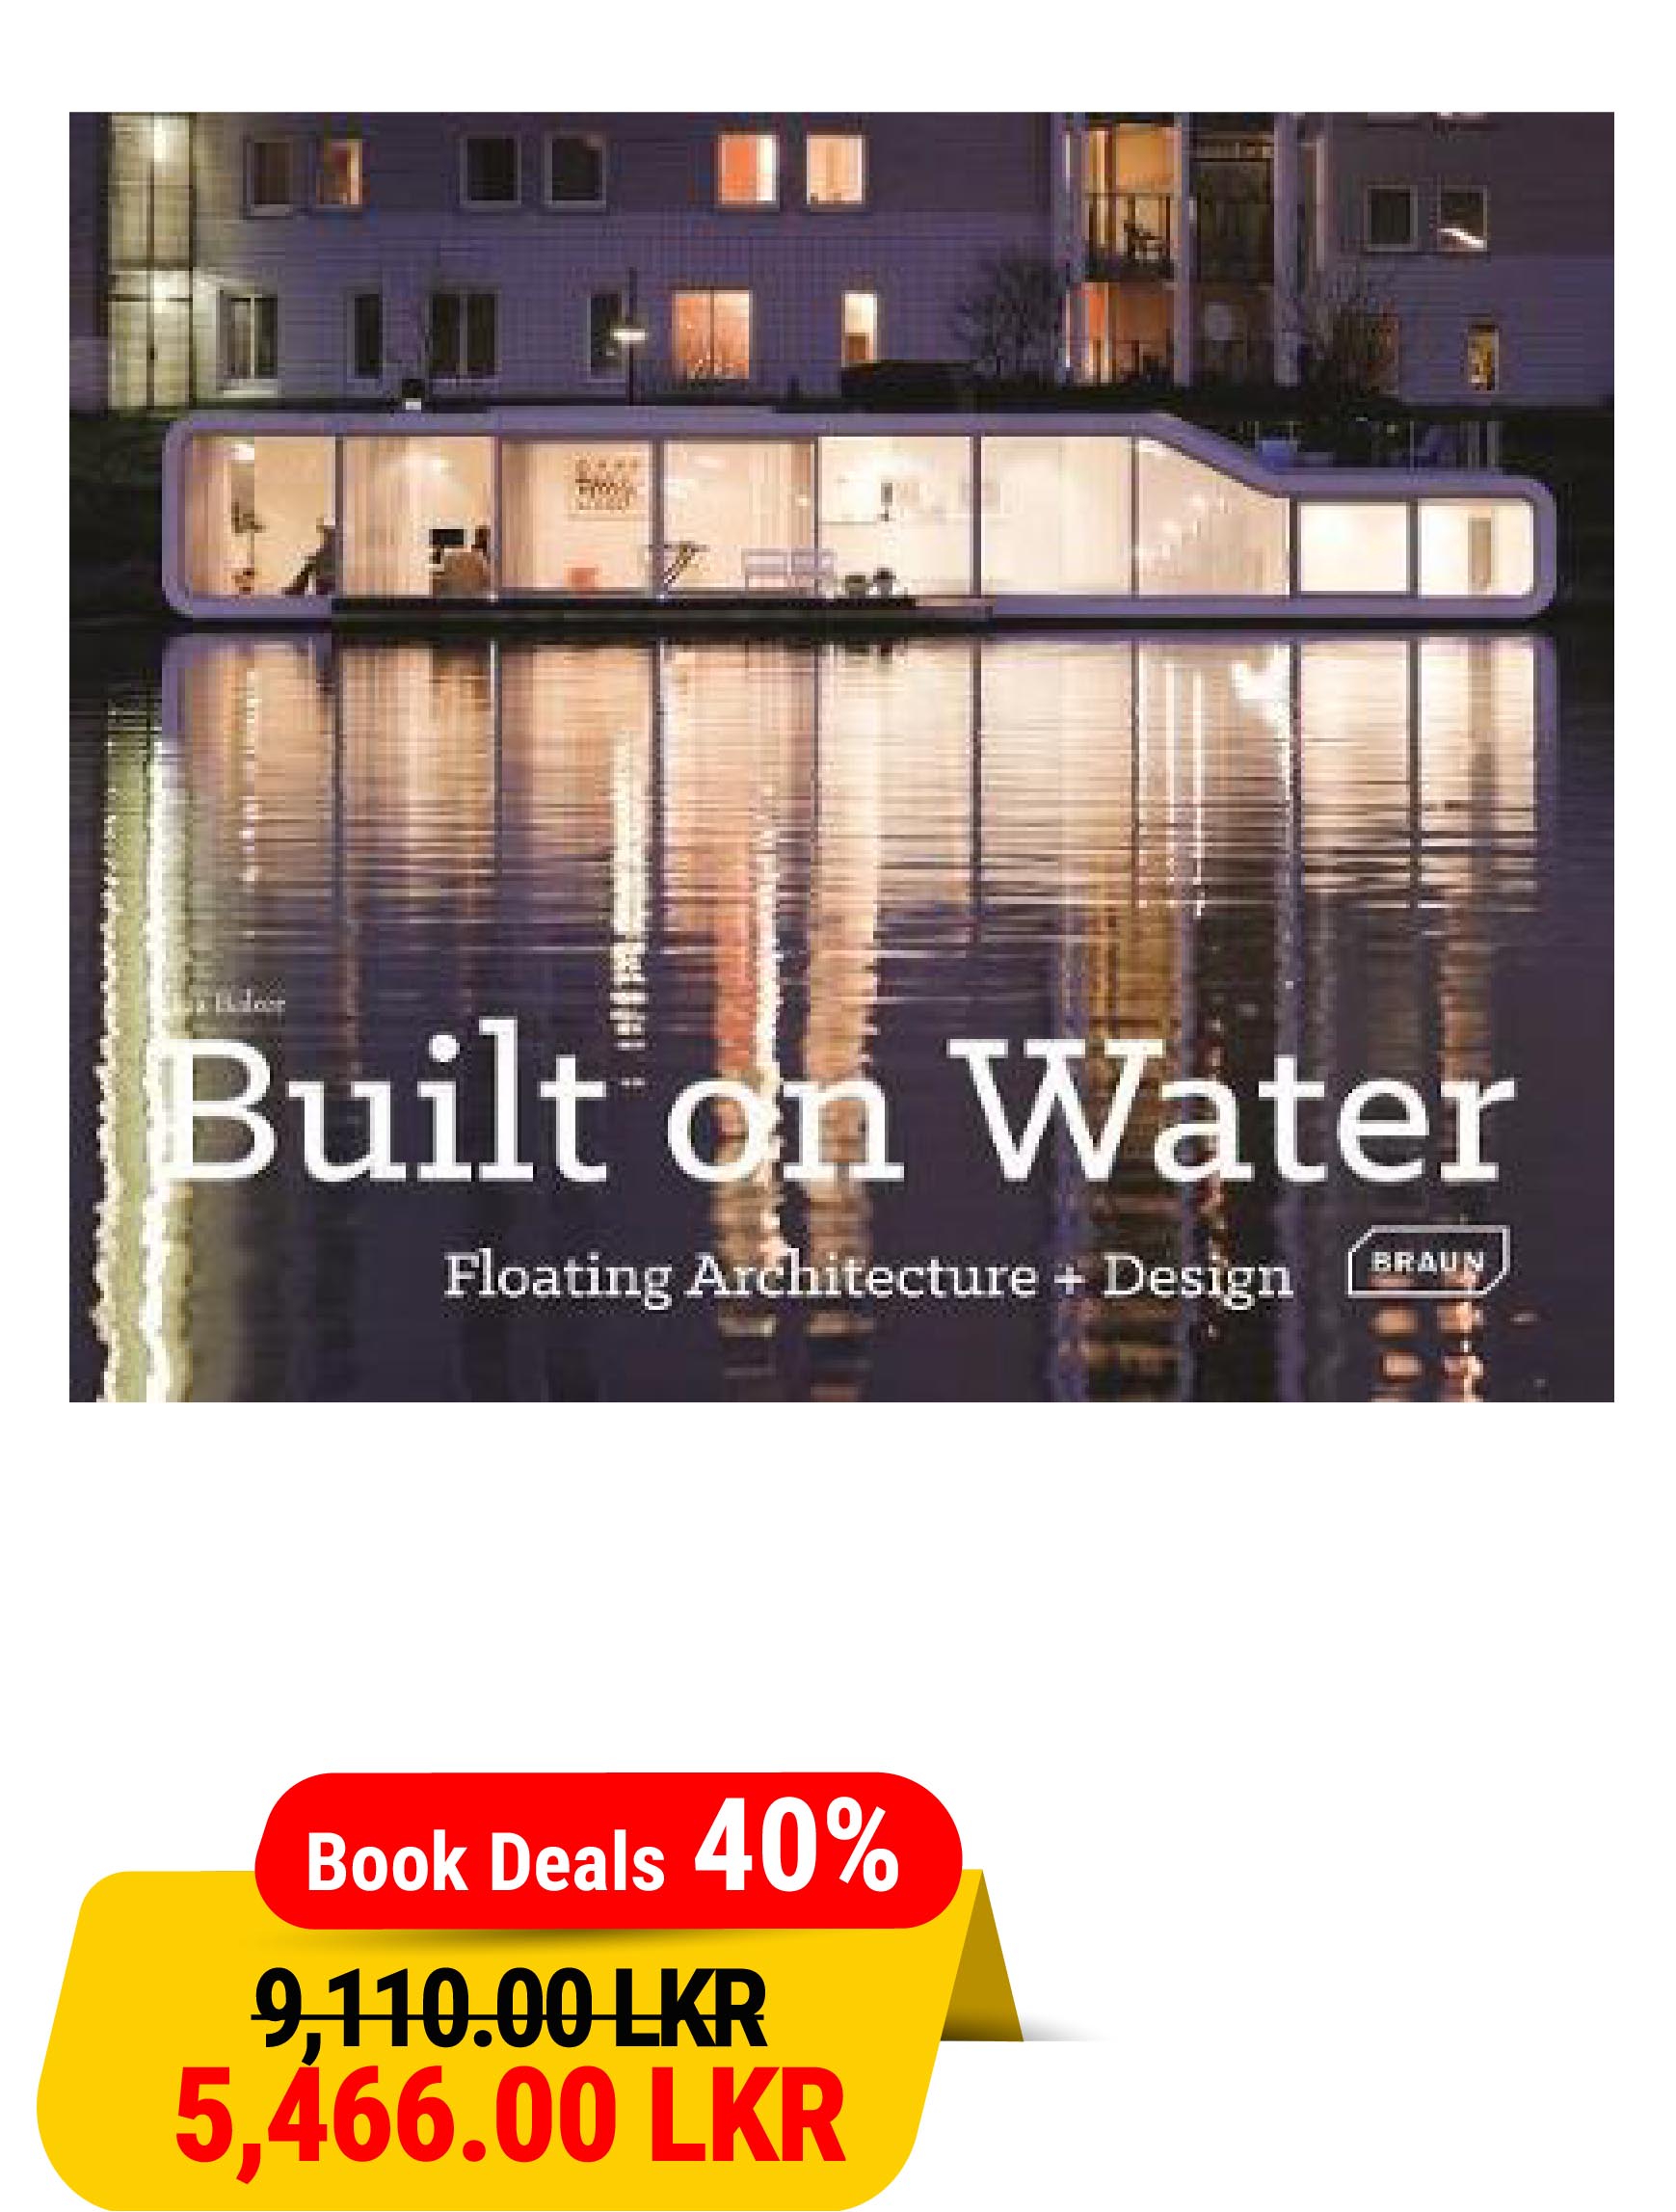 Built on Water - Floating Architecture + Design